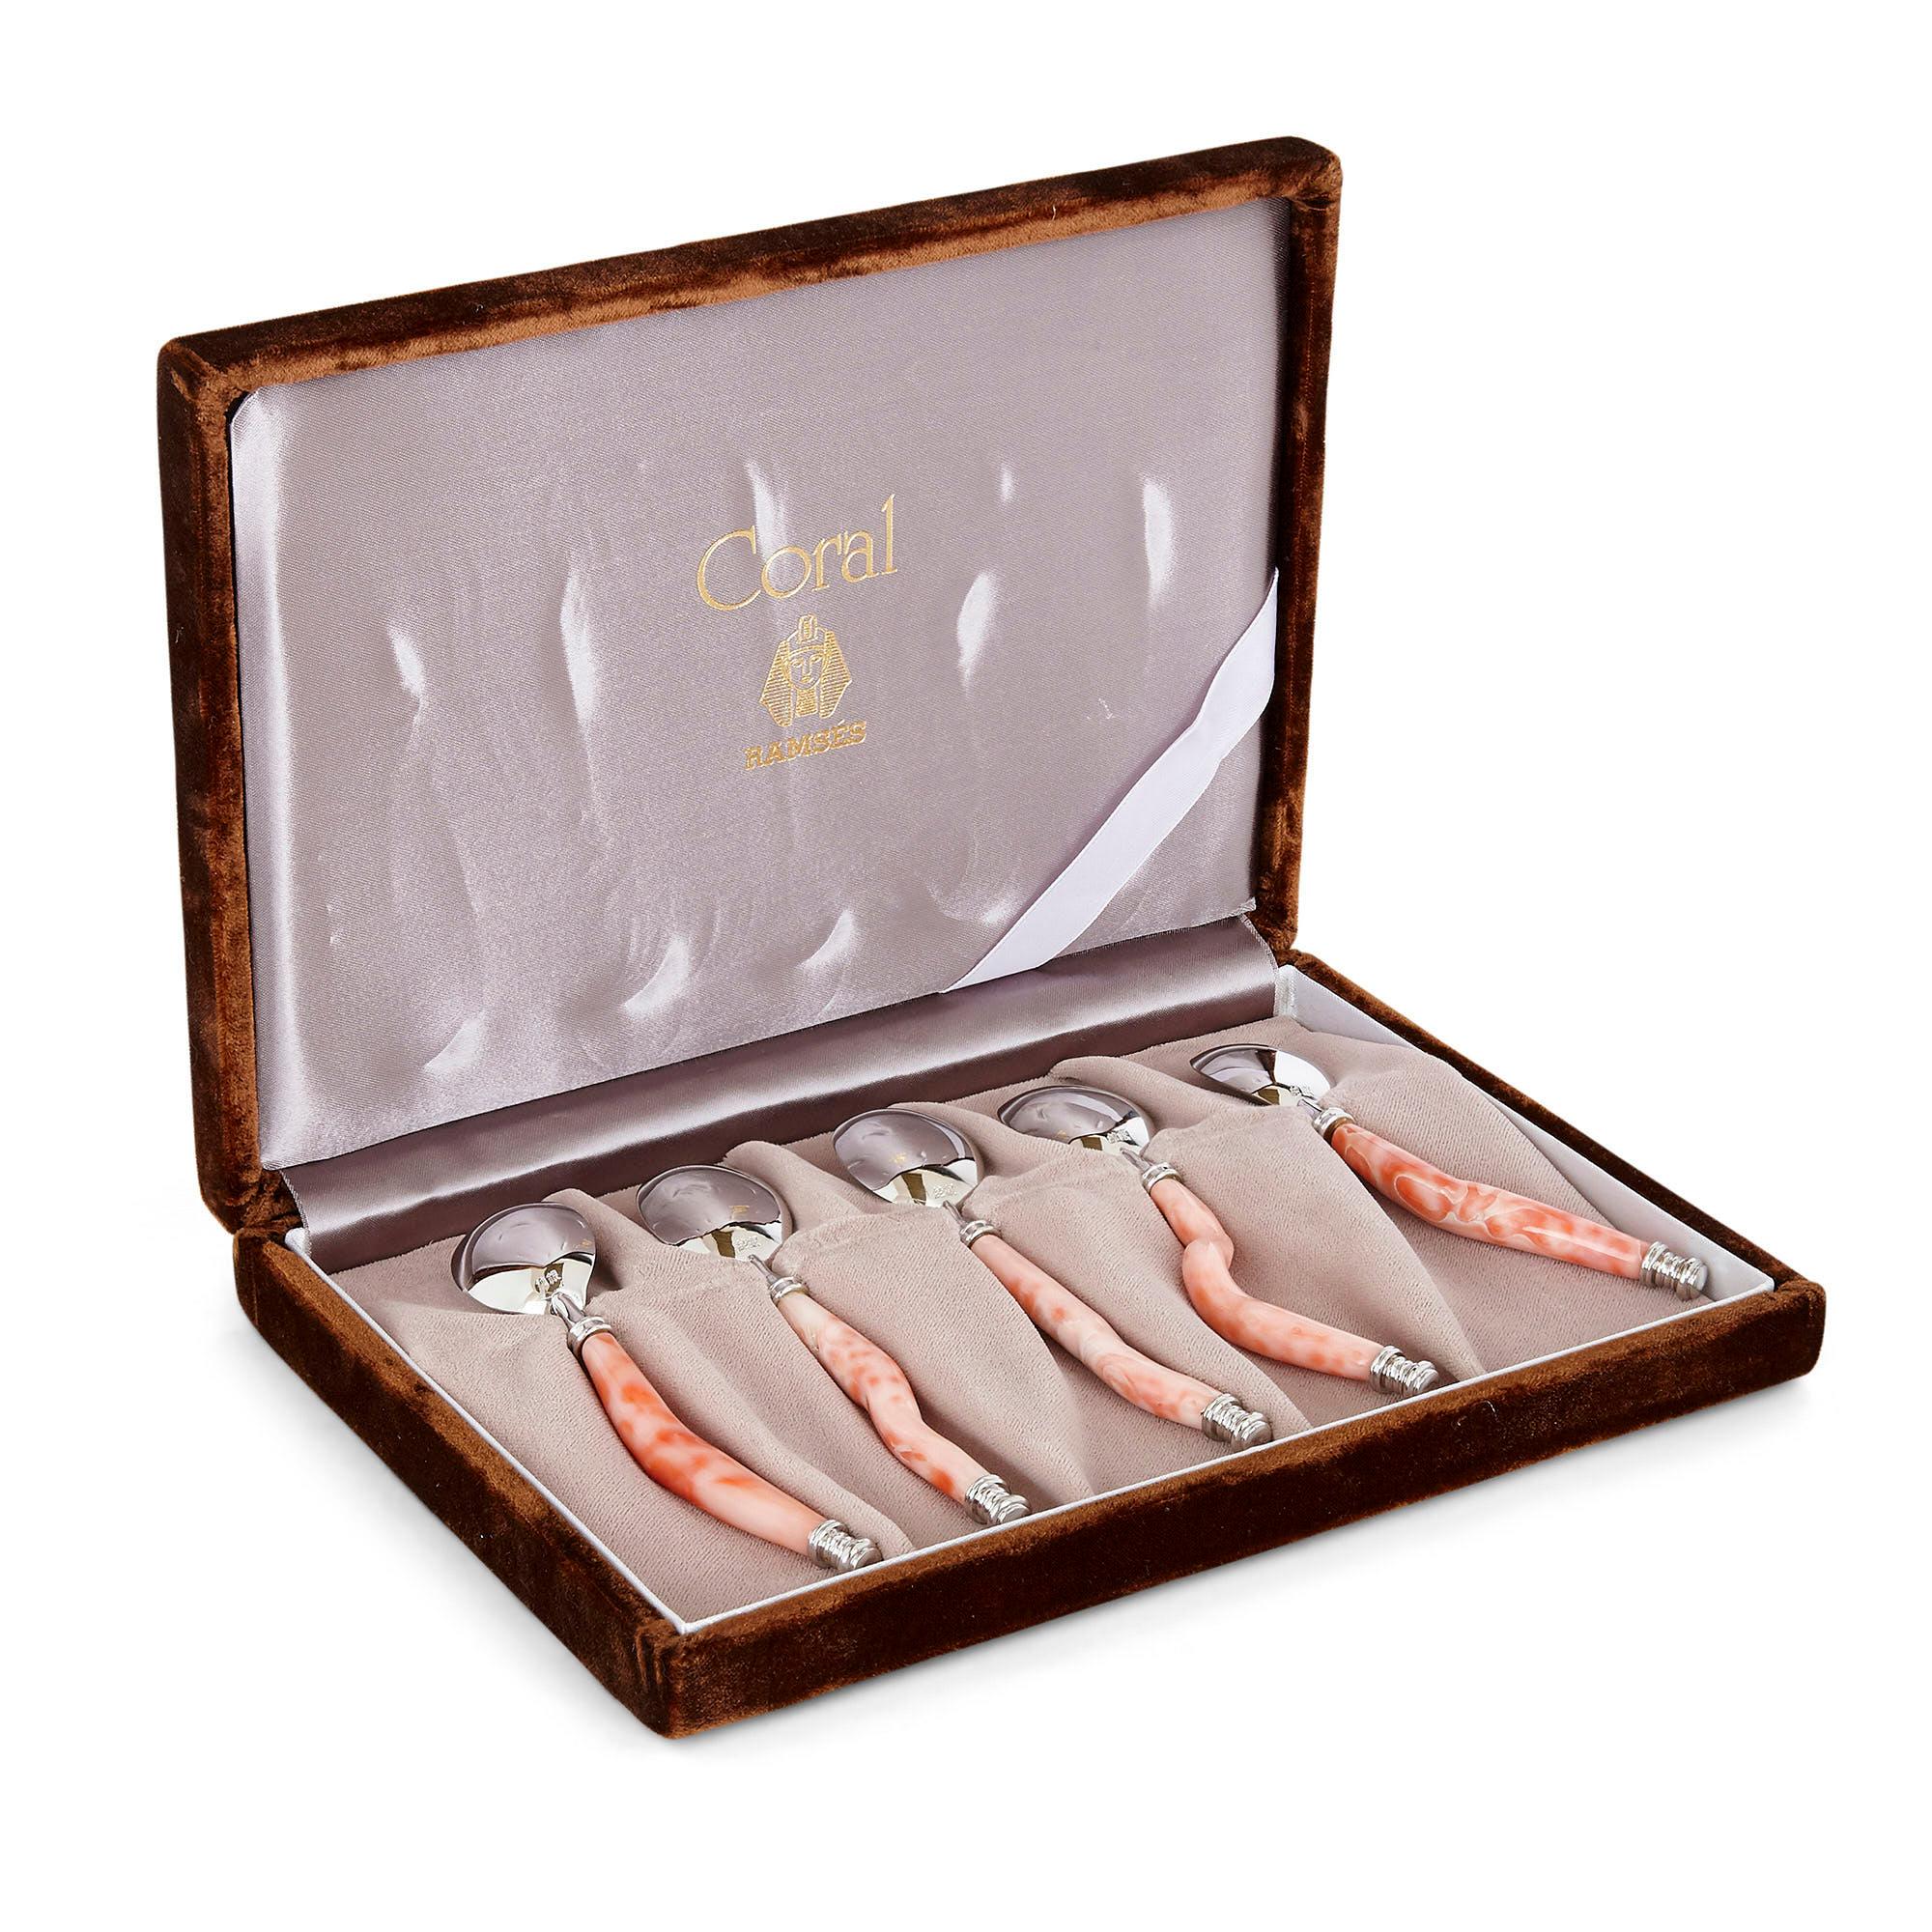 Set of five red coral and silver spoons
Chinese, 20th century
Measures: Spoon: Length 12cm, height 2cm
Box: Height 3cm, width 21cm, depth 15cm

The unusual caviar spoons in this set are crafted from coral and silver. Each spoon features a